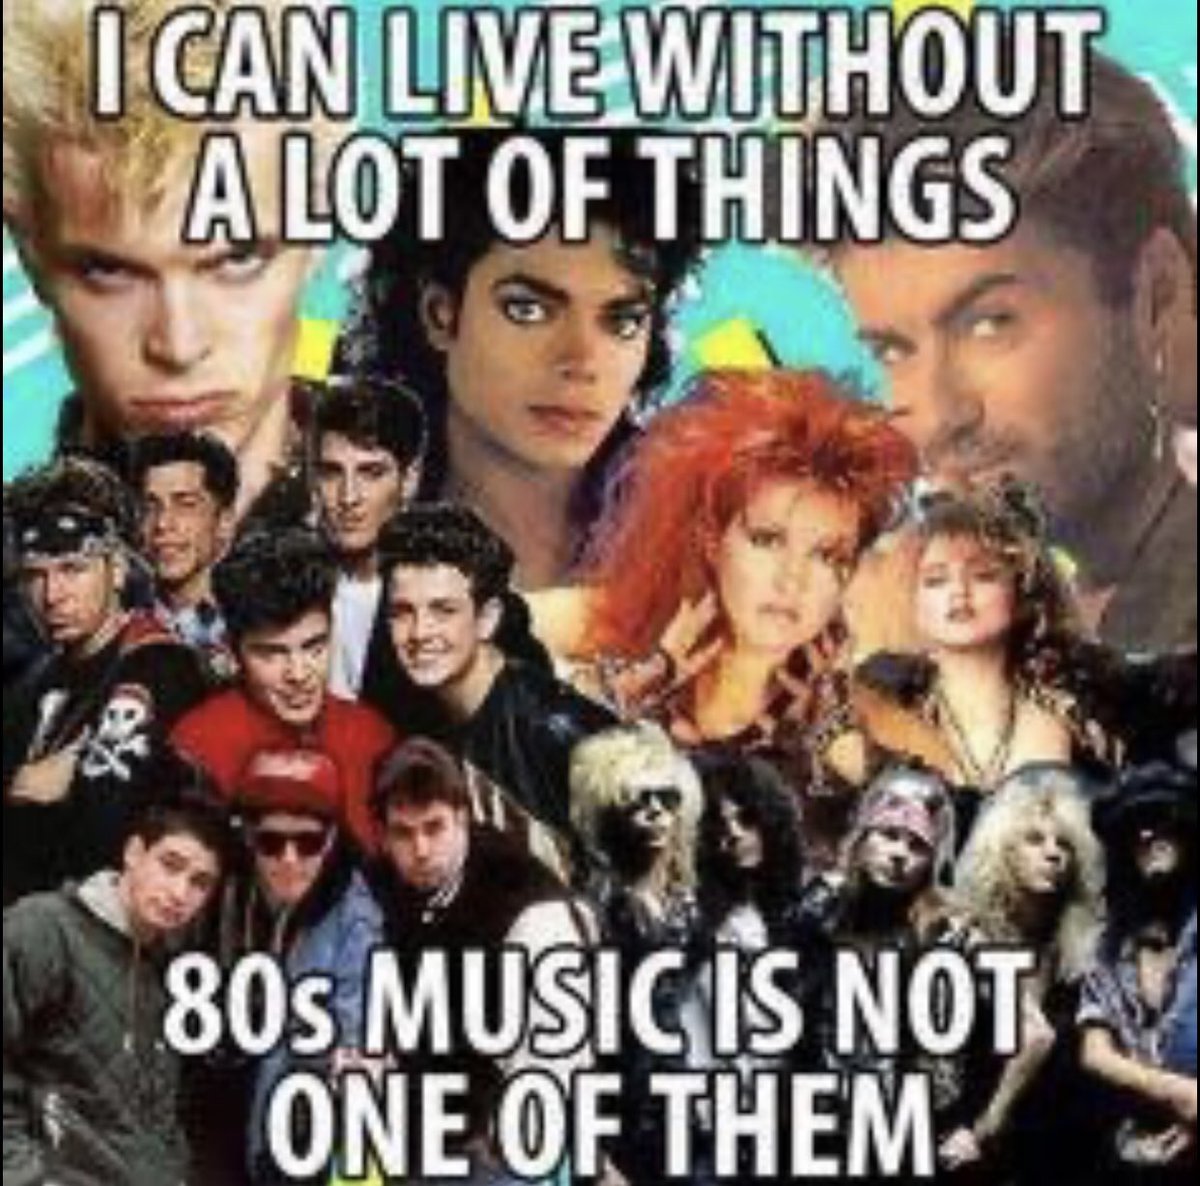 Every Generation Believes Theirs Was the Best and Often Questions Many Things New.  My Hope For Todays Music Industry is That It Puts More Importance in its Lyrics and Storytelling Than the Production and Beat.  

#80smusic #80srock #80srap #80shiphop #80scountry #freestyle